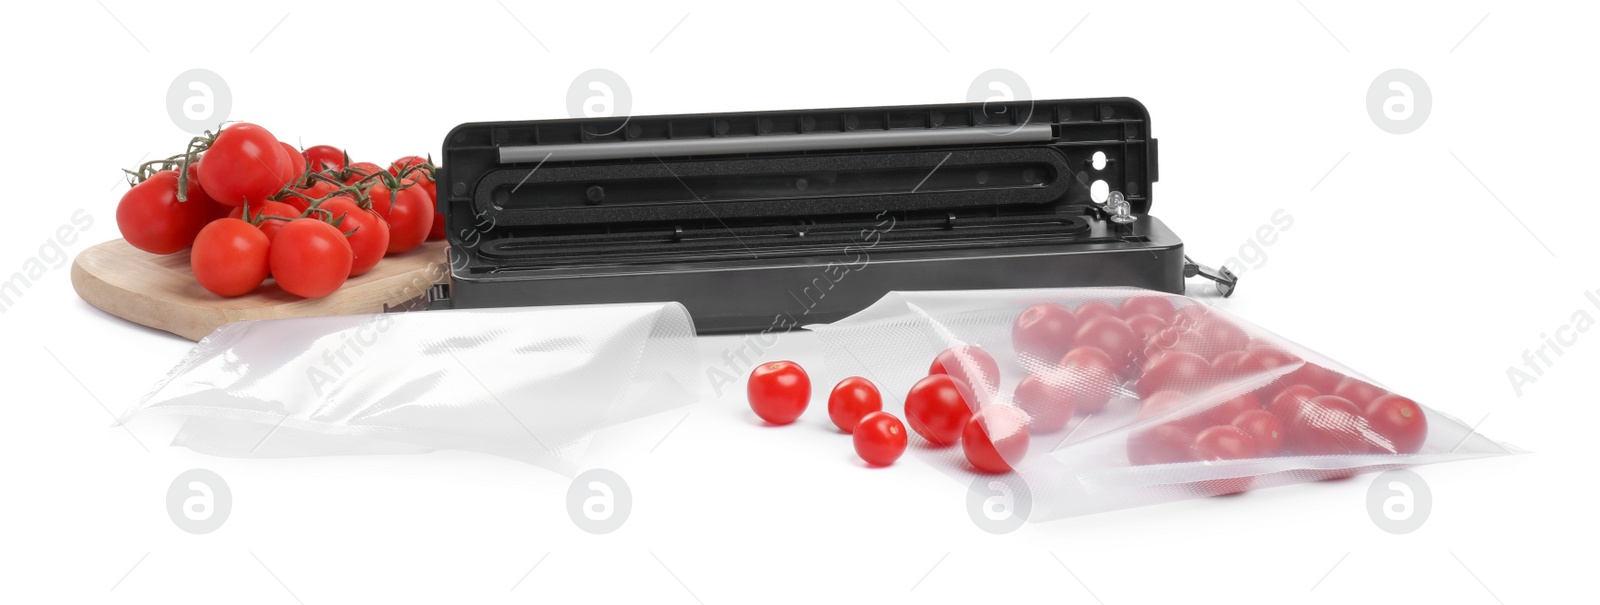 Photo of Sealer for vacuum packing with plastic bag of cherry tomatoes on white background